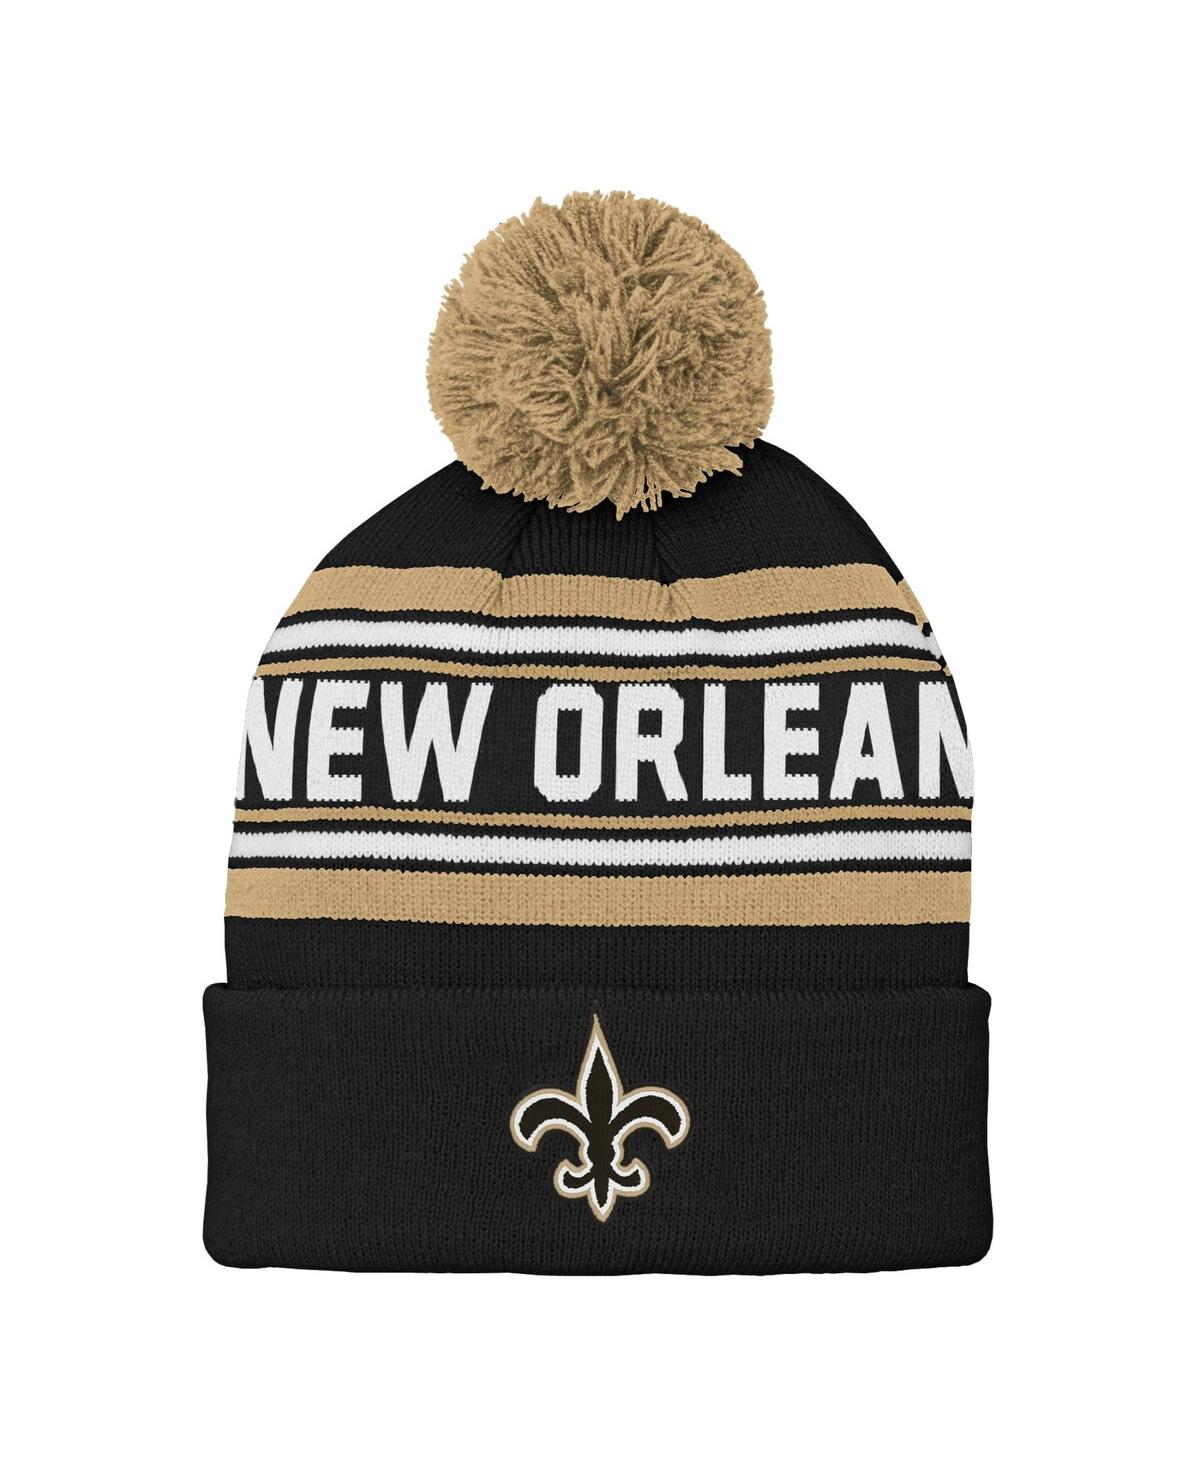 Outerstuff Kids' Youth Boys Black New Orleans Saints Jacquard Cuffed Knit Hat With Pom